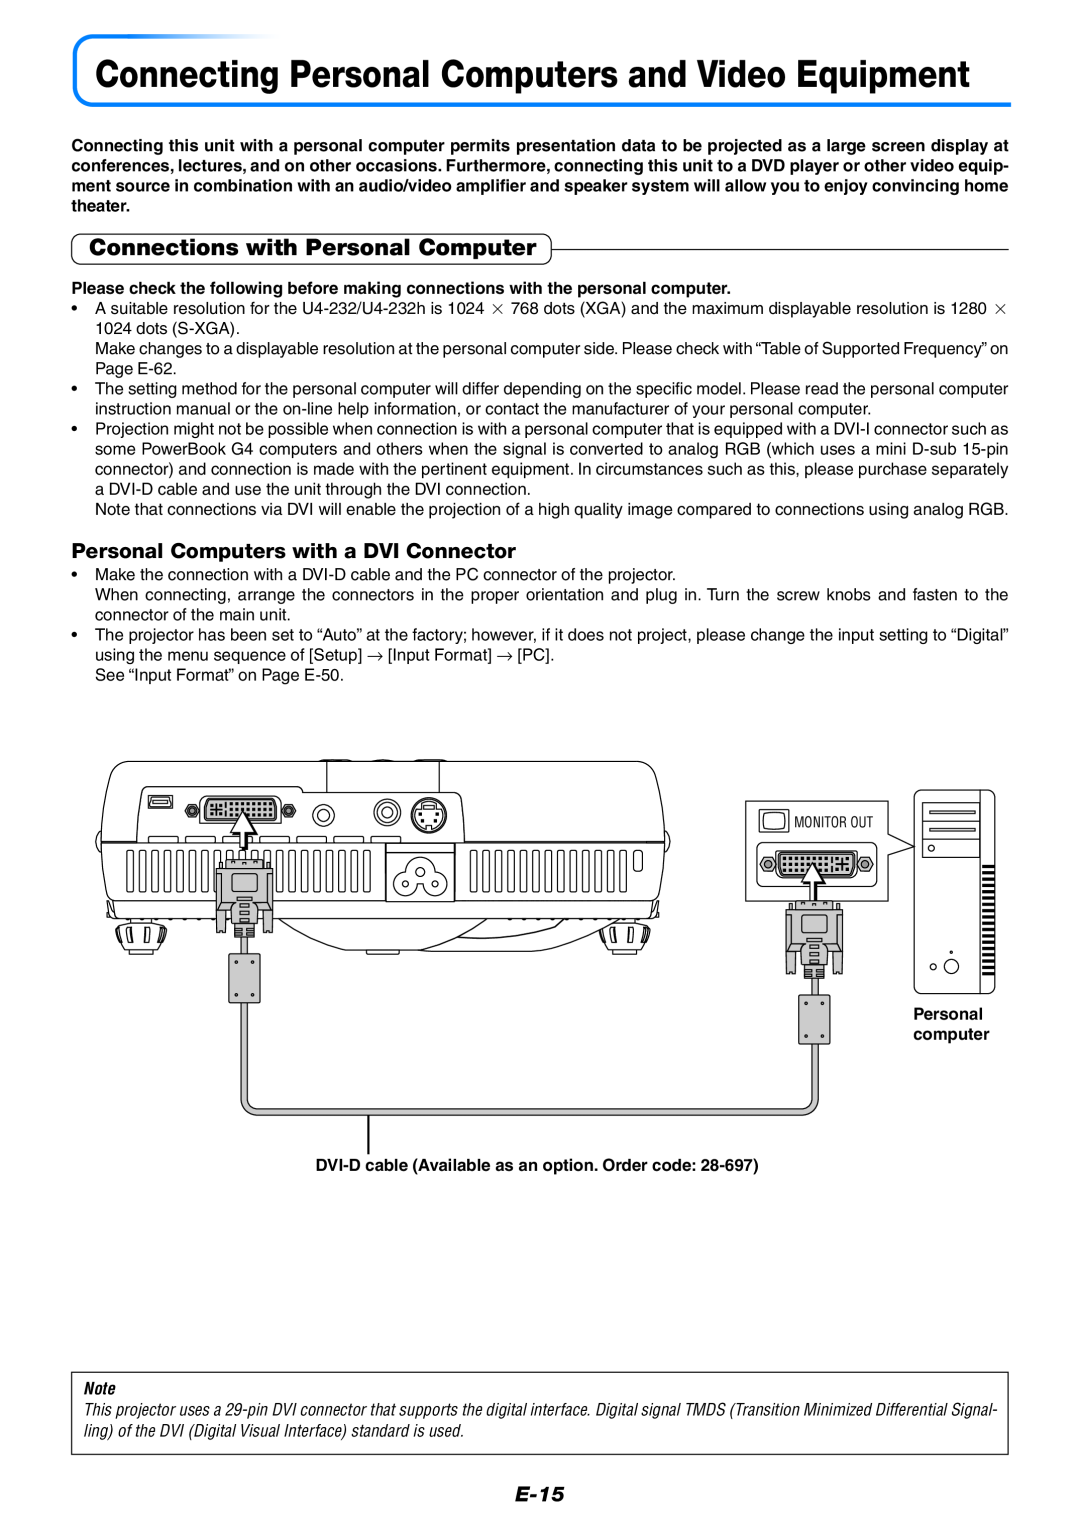 PLUS Vision U4-232 user manual Connections with Personal Computer, Personal Computers with a DVI Connector, E-15 